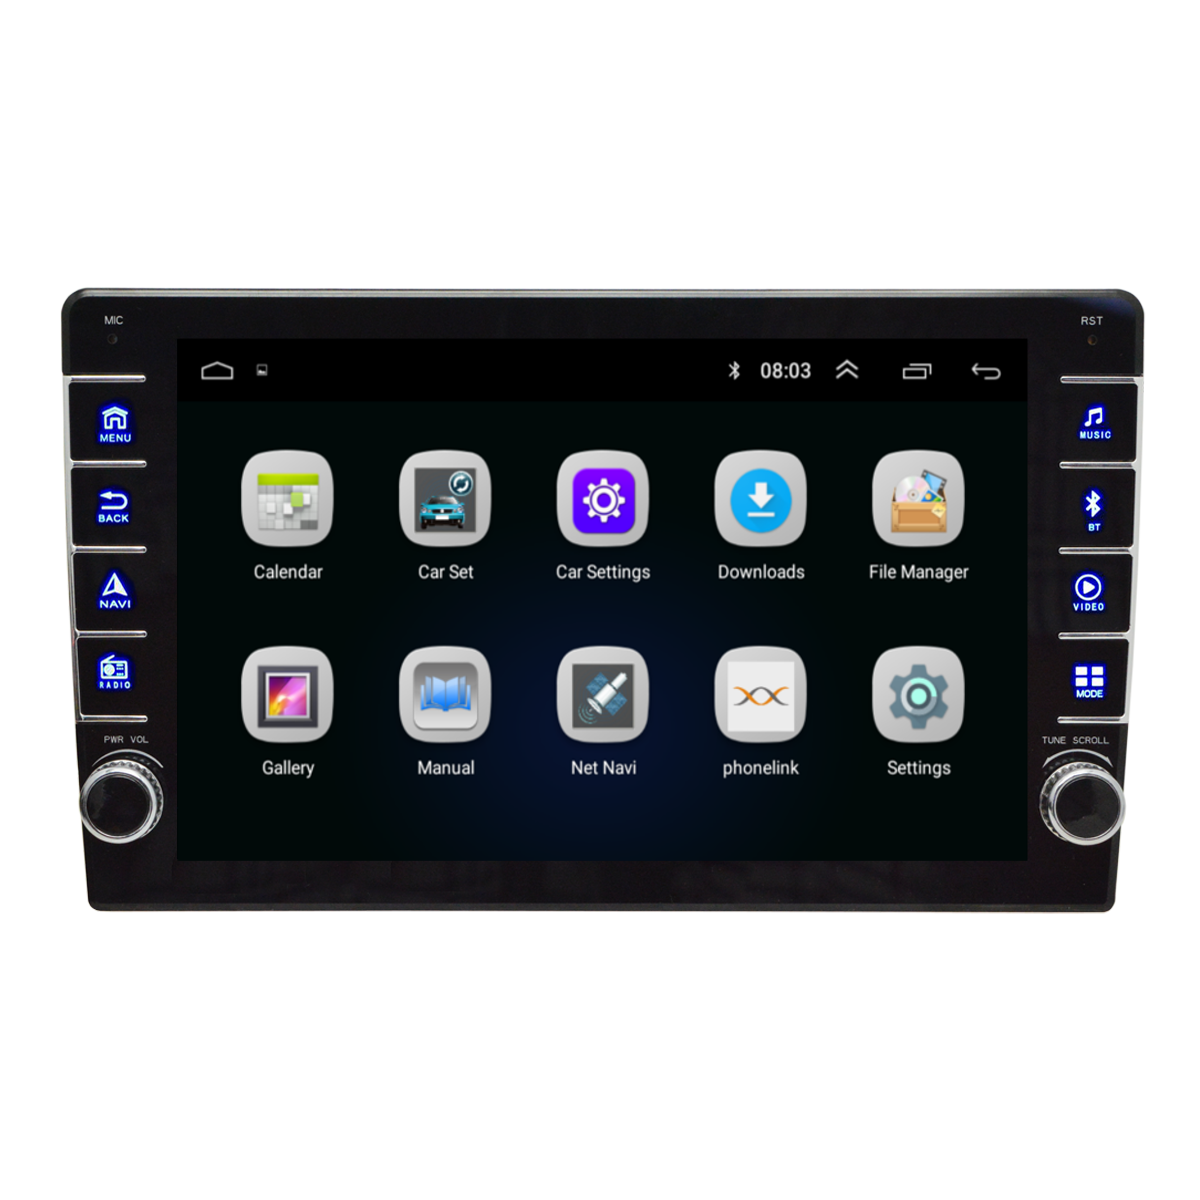 8Inch 9Inch 1Din For Android 8.1 Car Mlitimedia Player Adjustable Screen Quad Core 1+16G WIFI GPS FM Subwoofer